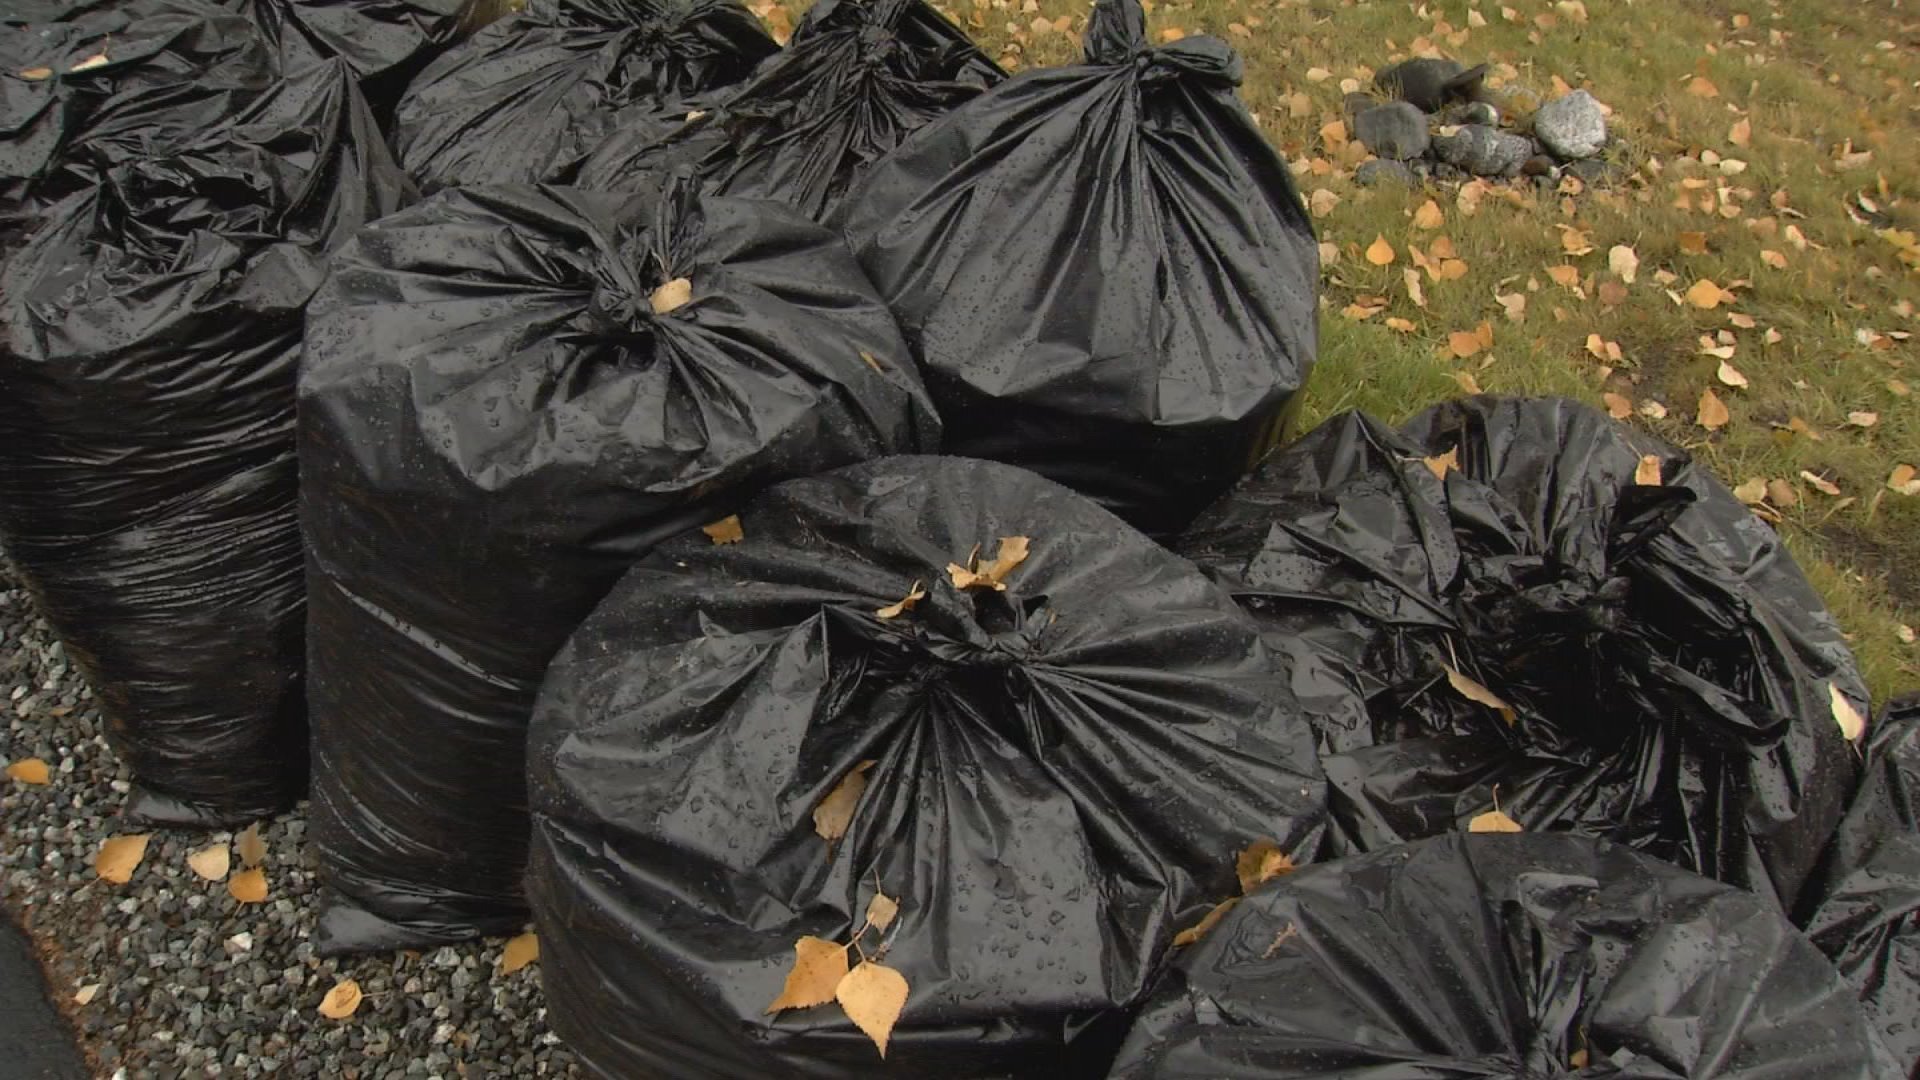 The charge to pick up extra garbage bags has gone up for many Anchorage  residents